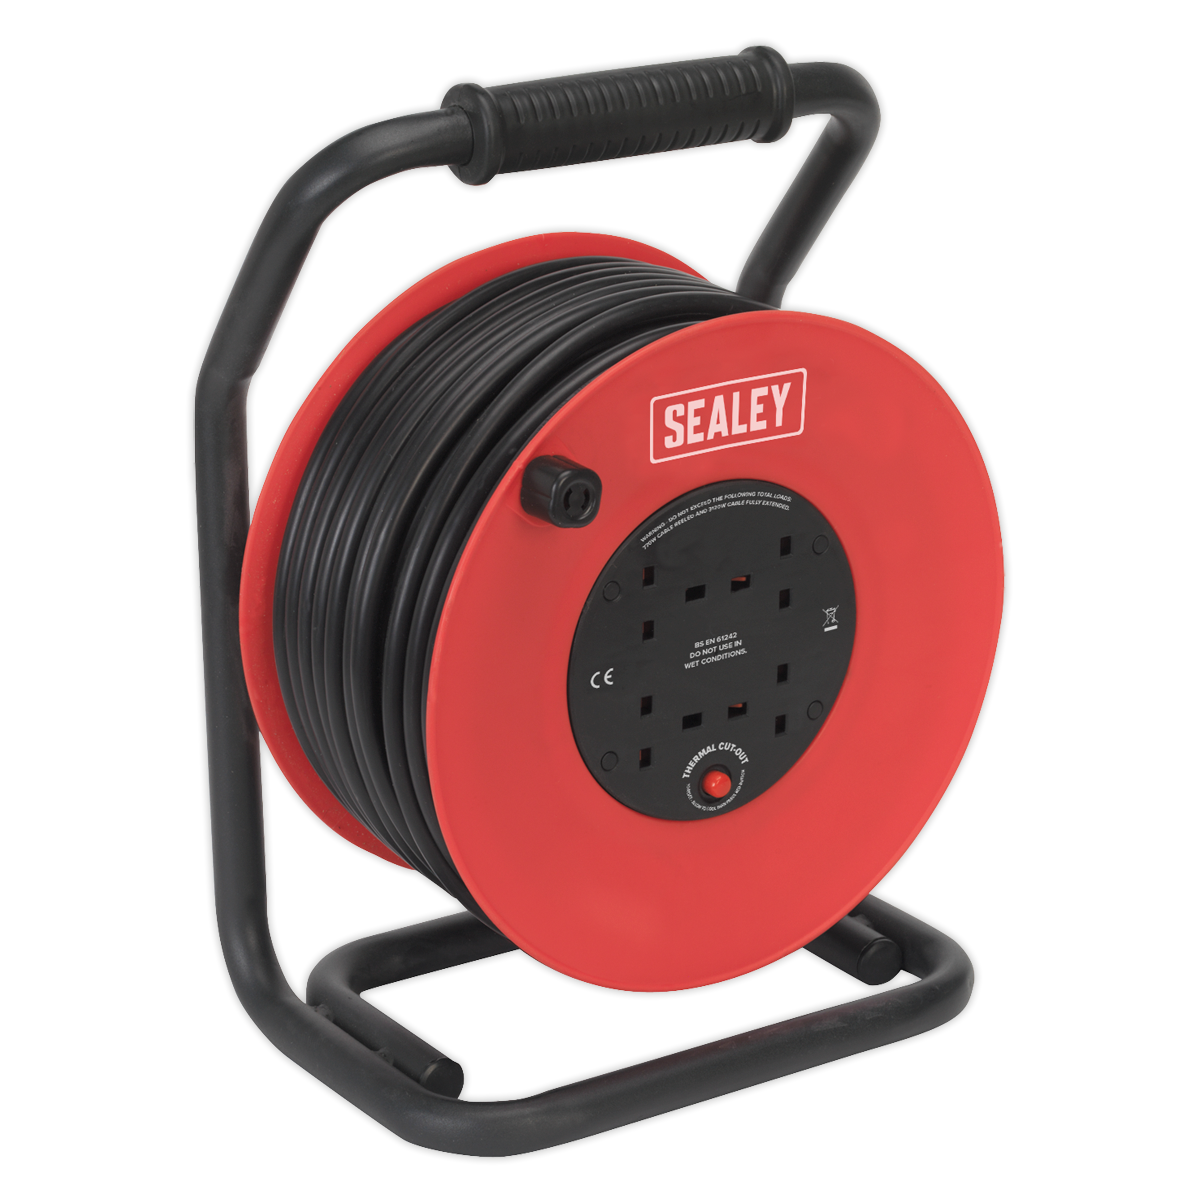 SEALEY Cable Reel 50m 4 x 230V 2.5mm² Heavy-Duty Thermal Trip